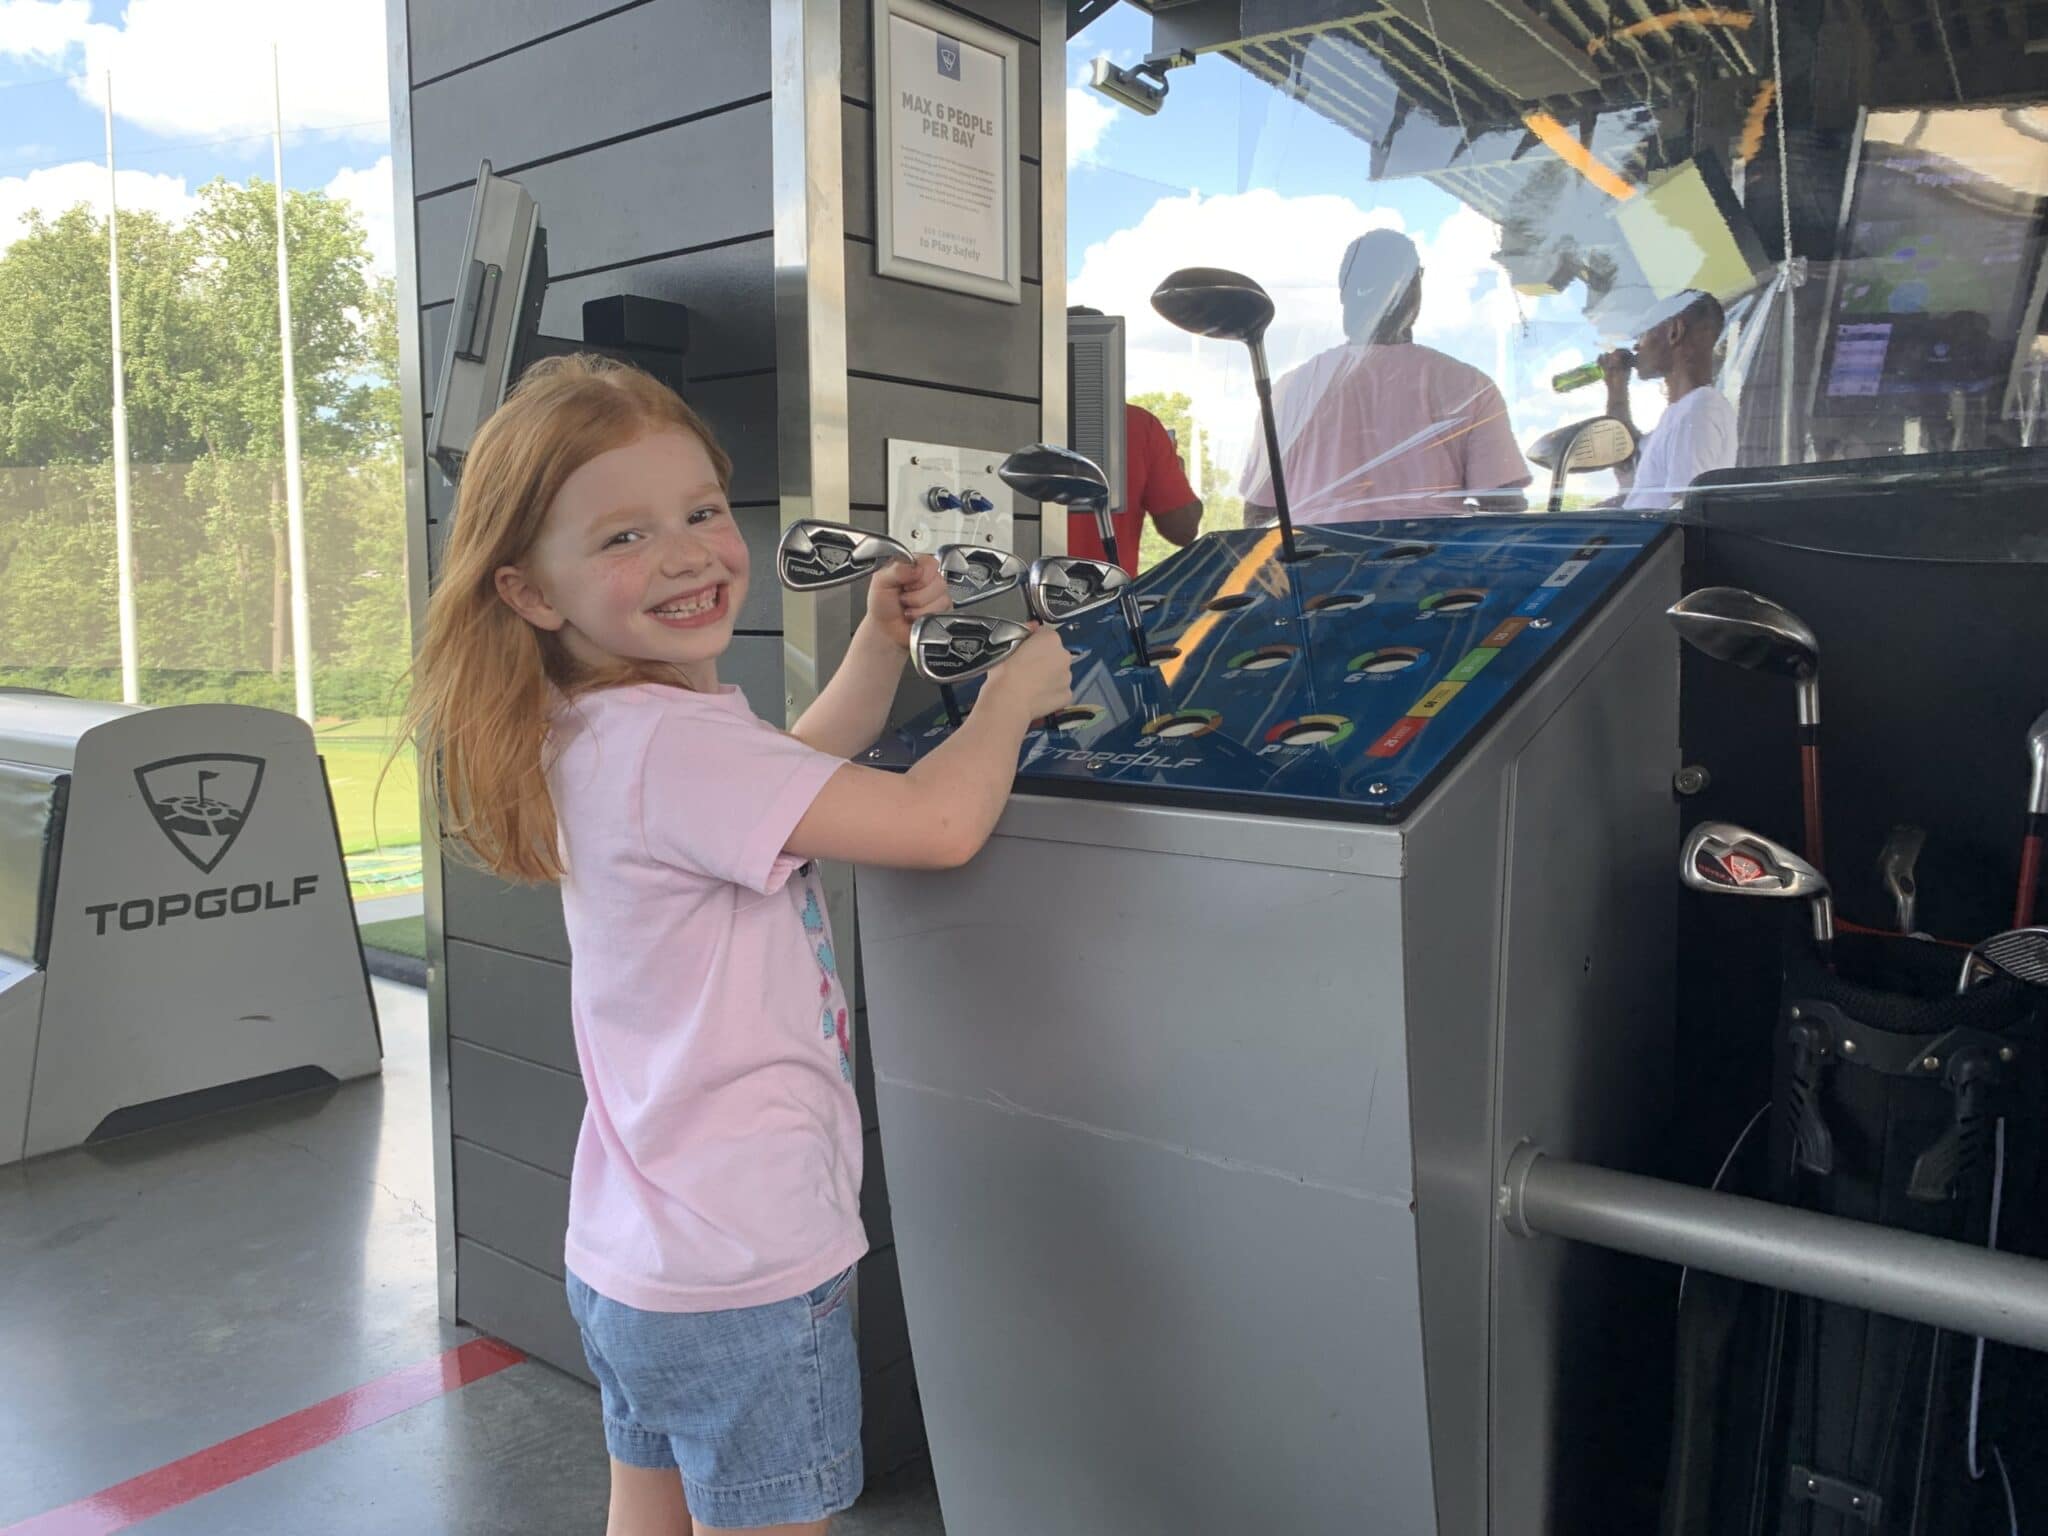 selecting a golf club at topgolf